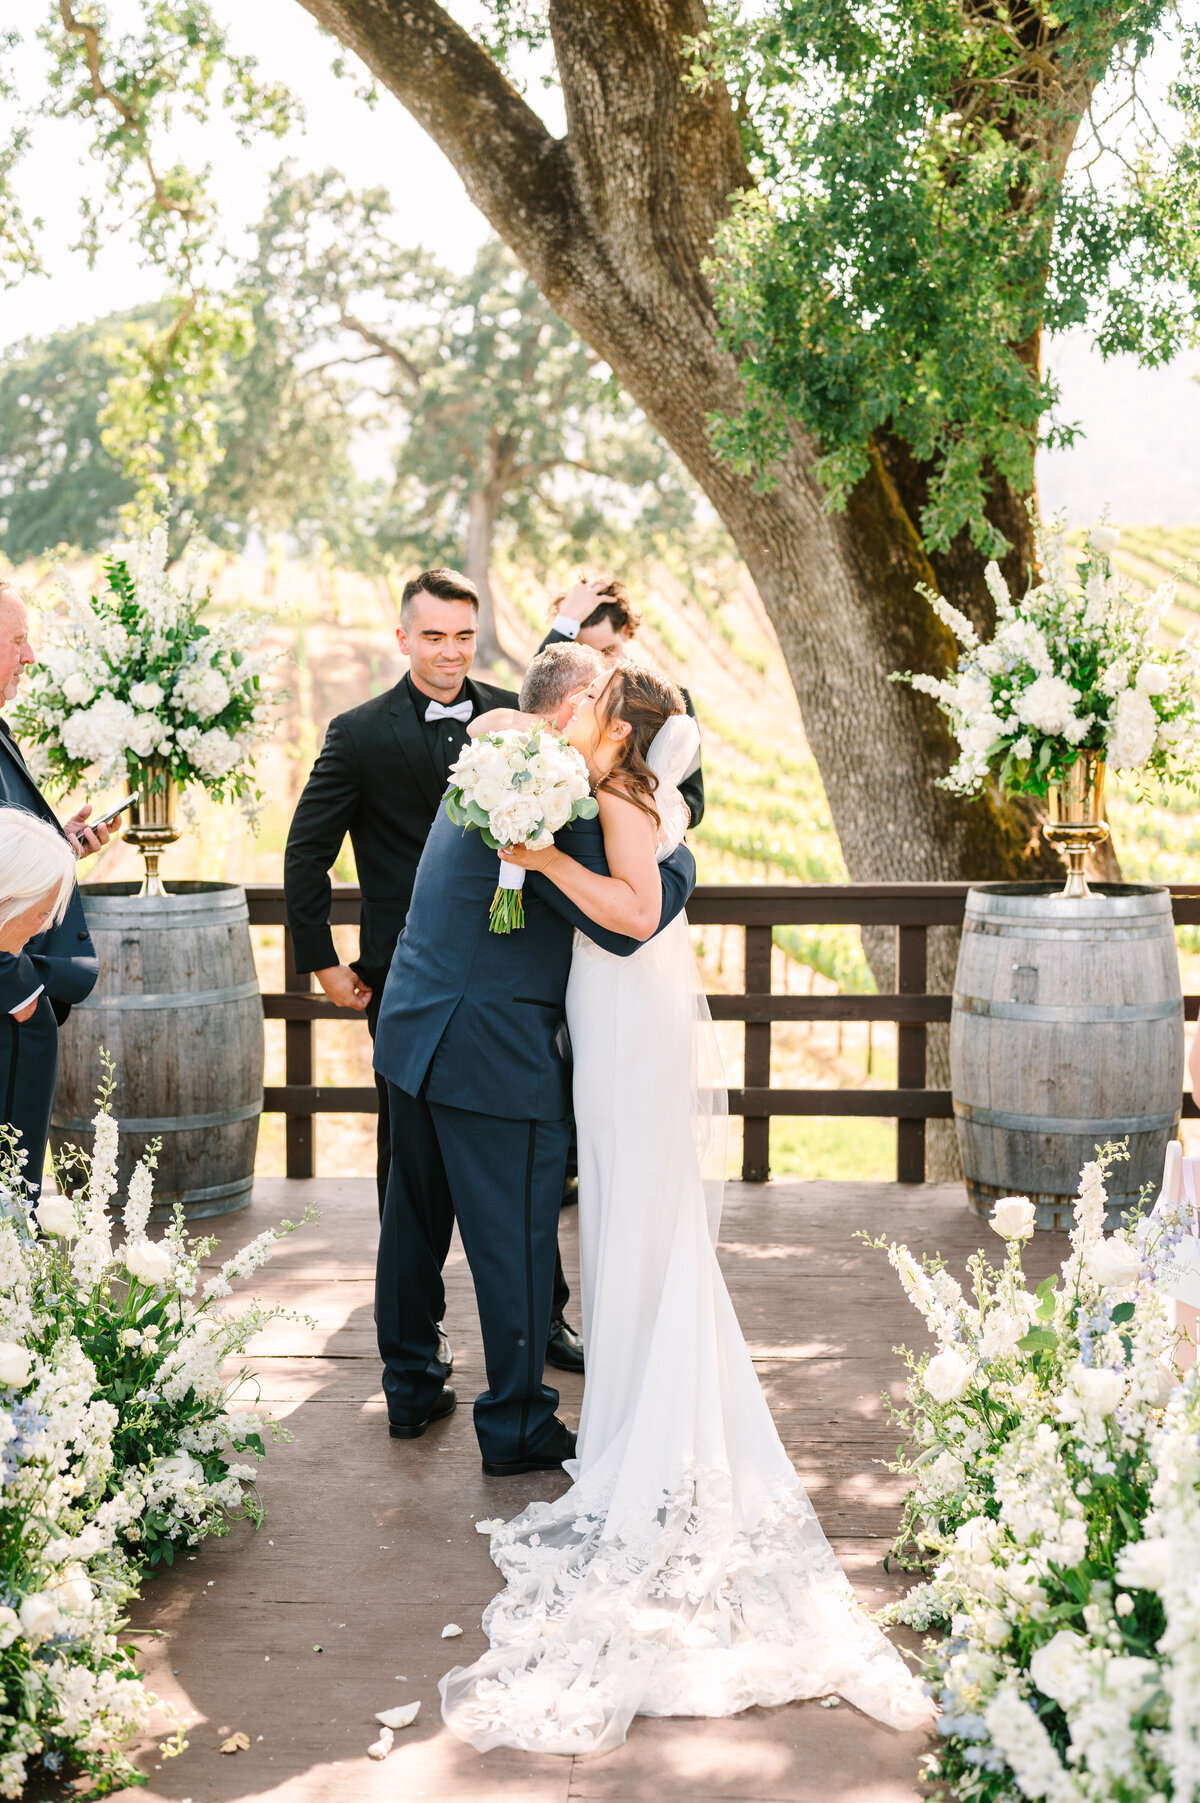 bride hugging her father next to soon-to-be groom in sonoma vineyard before wedding ceremony with white florals and greenery all around.